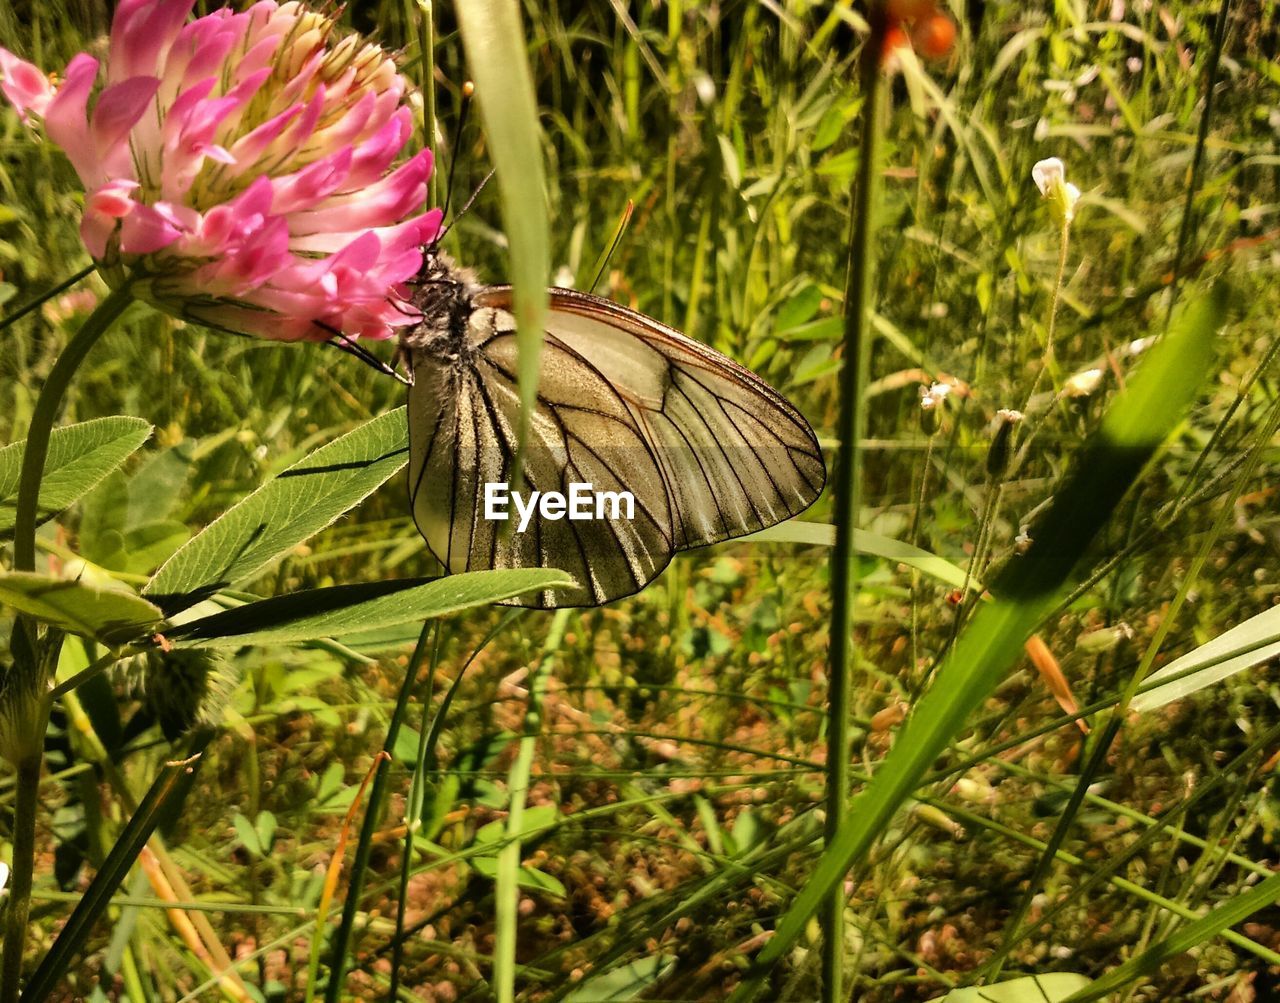 CLOSE-UP OF BUTTERFLY ON FLOWER IN PARK